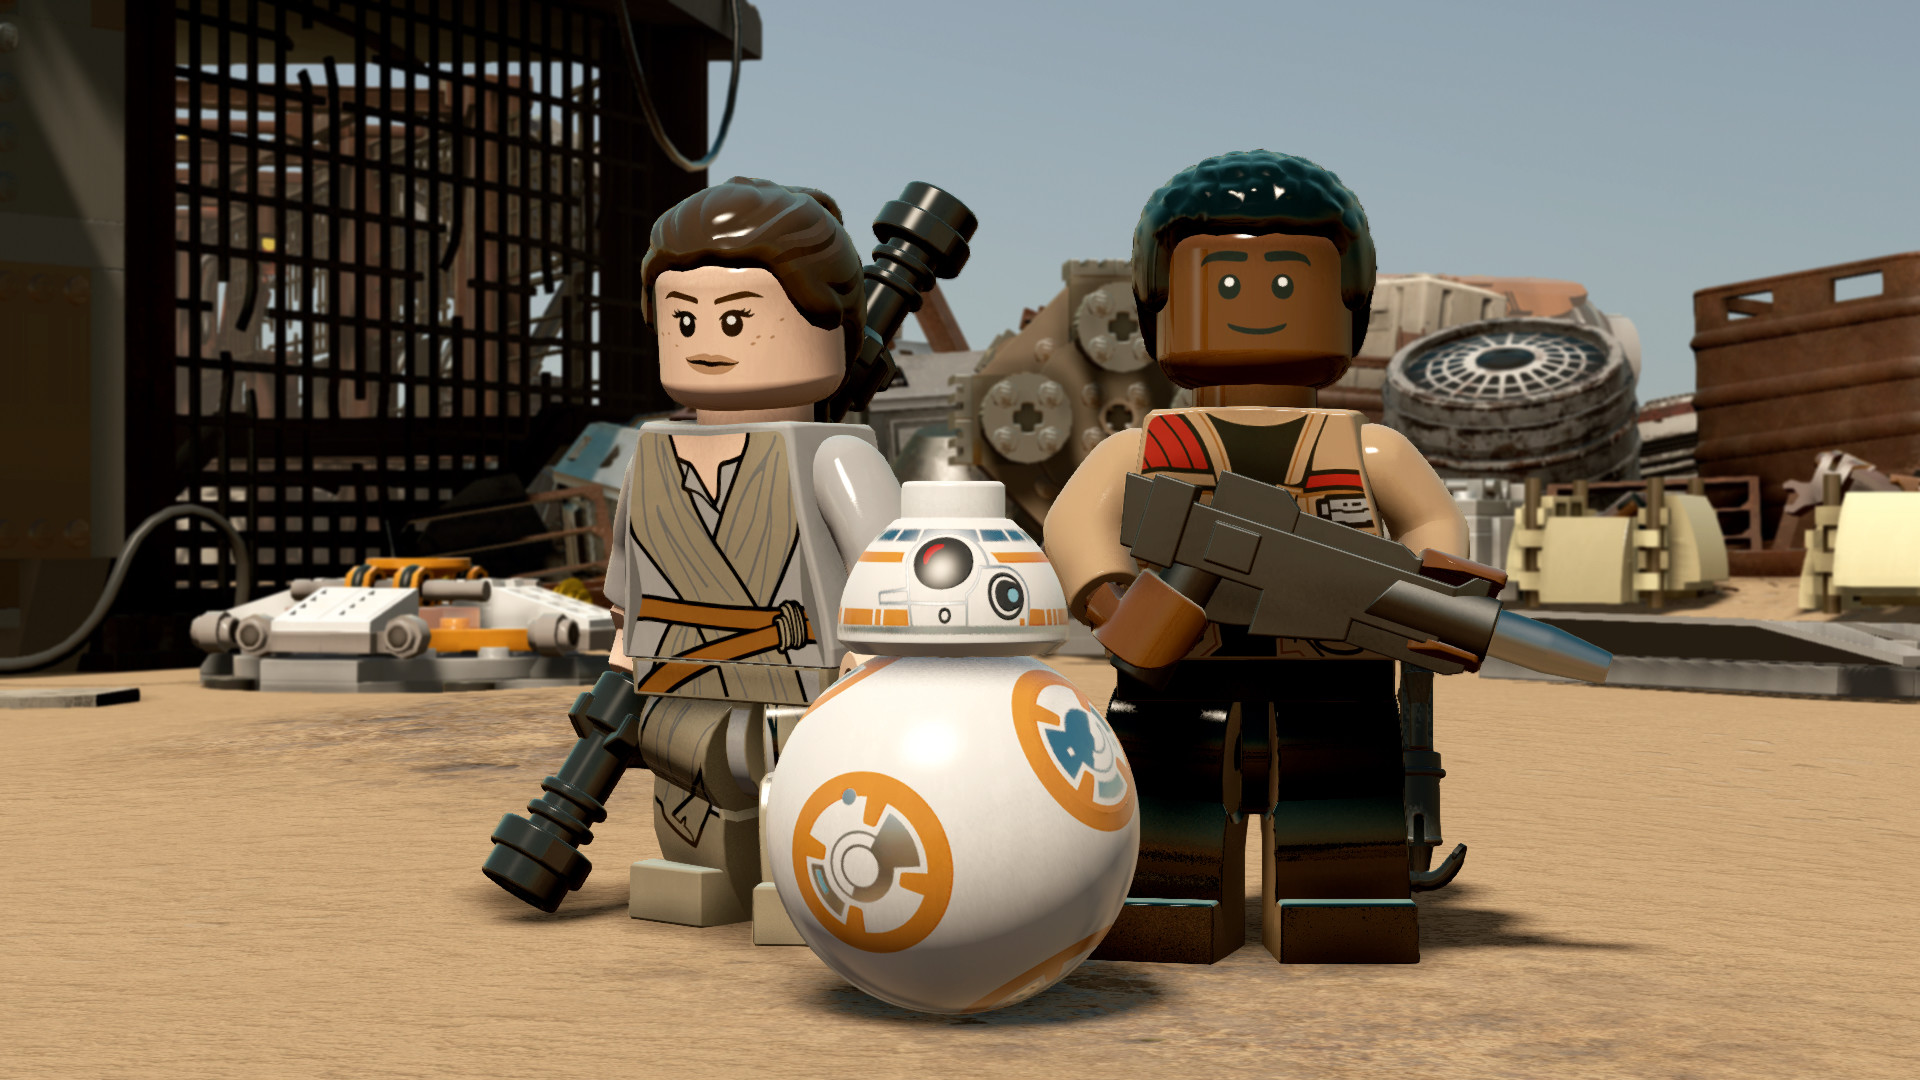 LEGO Star Wars: The Force Awakens Gold Edition Steam CD Key, $5.64